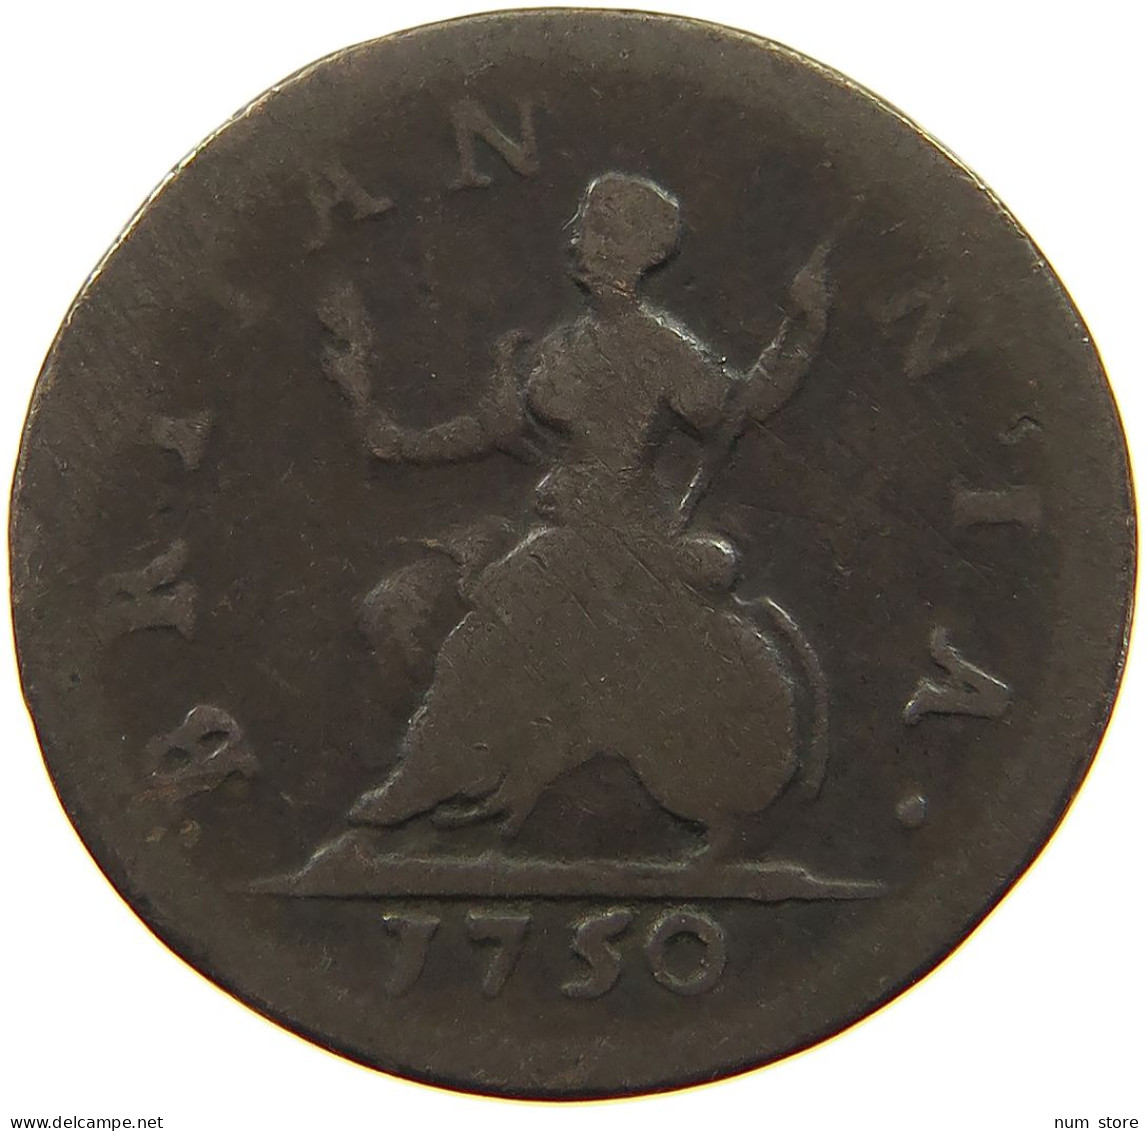 GREAT BRITAIN FARTHING 1750 George II. 1727-1760. #a011 0161 - A. 1 Farthing